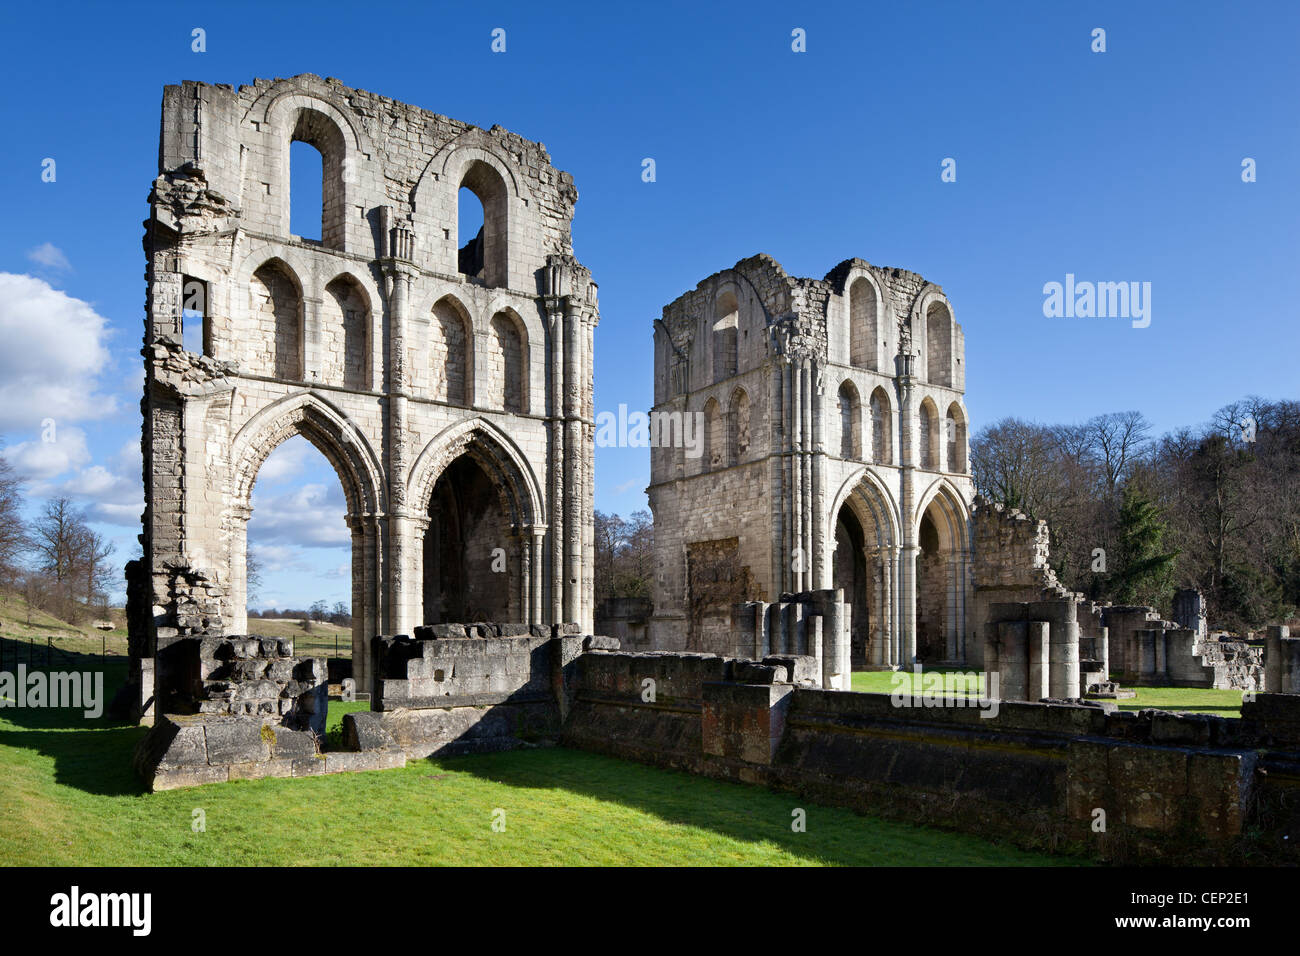 The ruins of Roche Abbey, a cistercian priory founded in 1147 at Maltby near Rotherham, South Yorkshire, UK Stock Photo